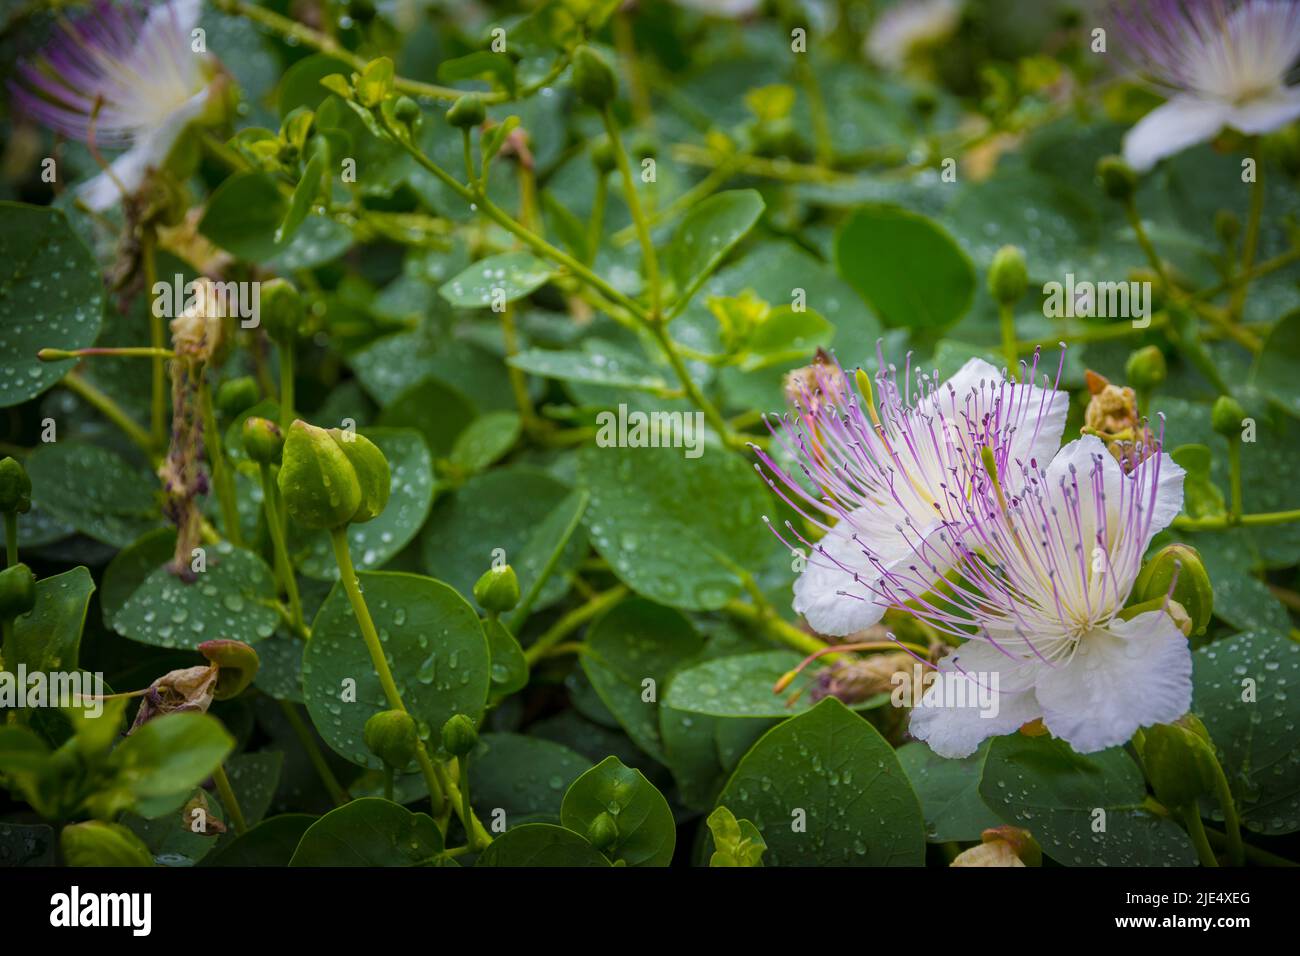 Close-up shot of Capparis spinosa, the caper bush, also called Flinders rose, a perennial plant. Selective focus. Stock Photo